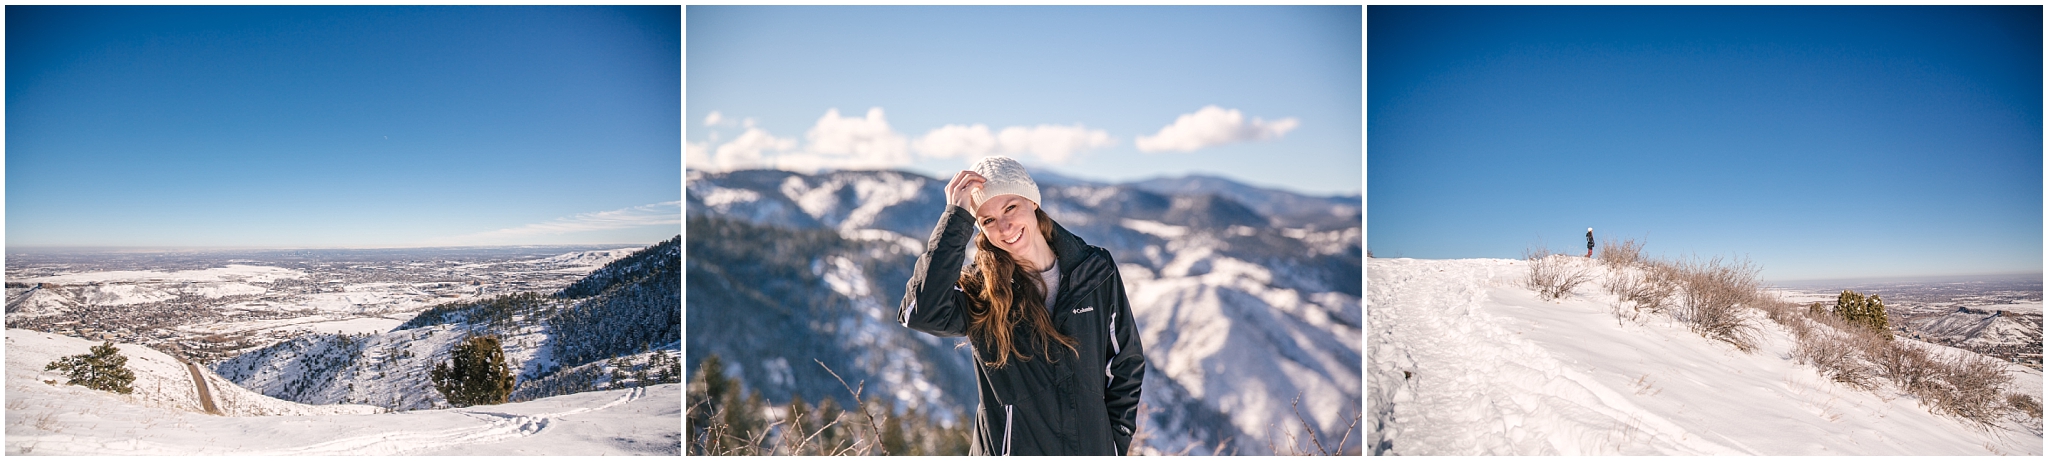 Lookout Mountain - Favorite Colorado Mountain Locations for Adventurous Engagement Pictures